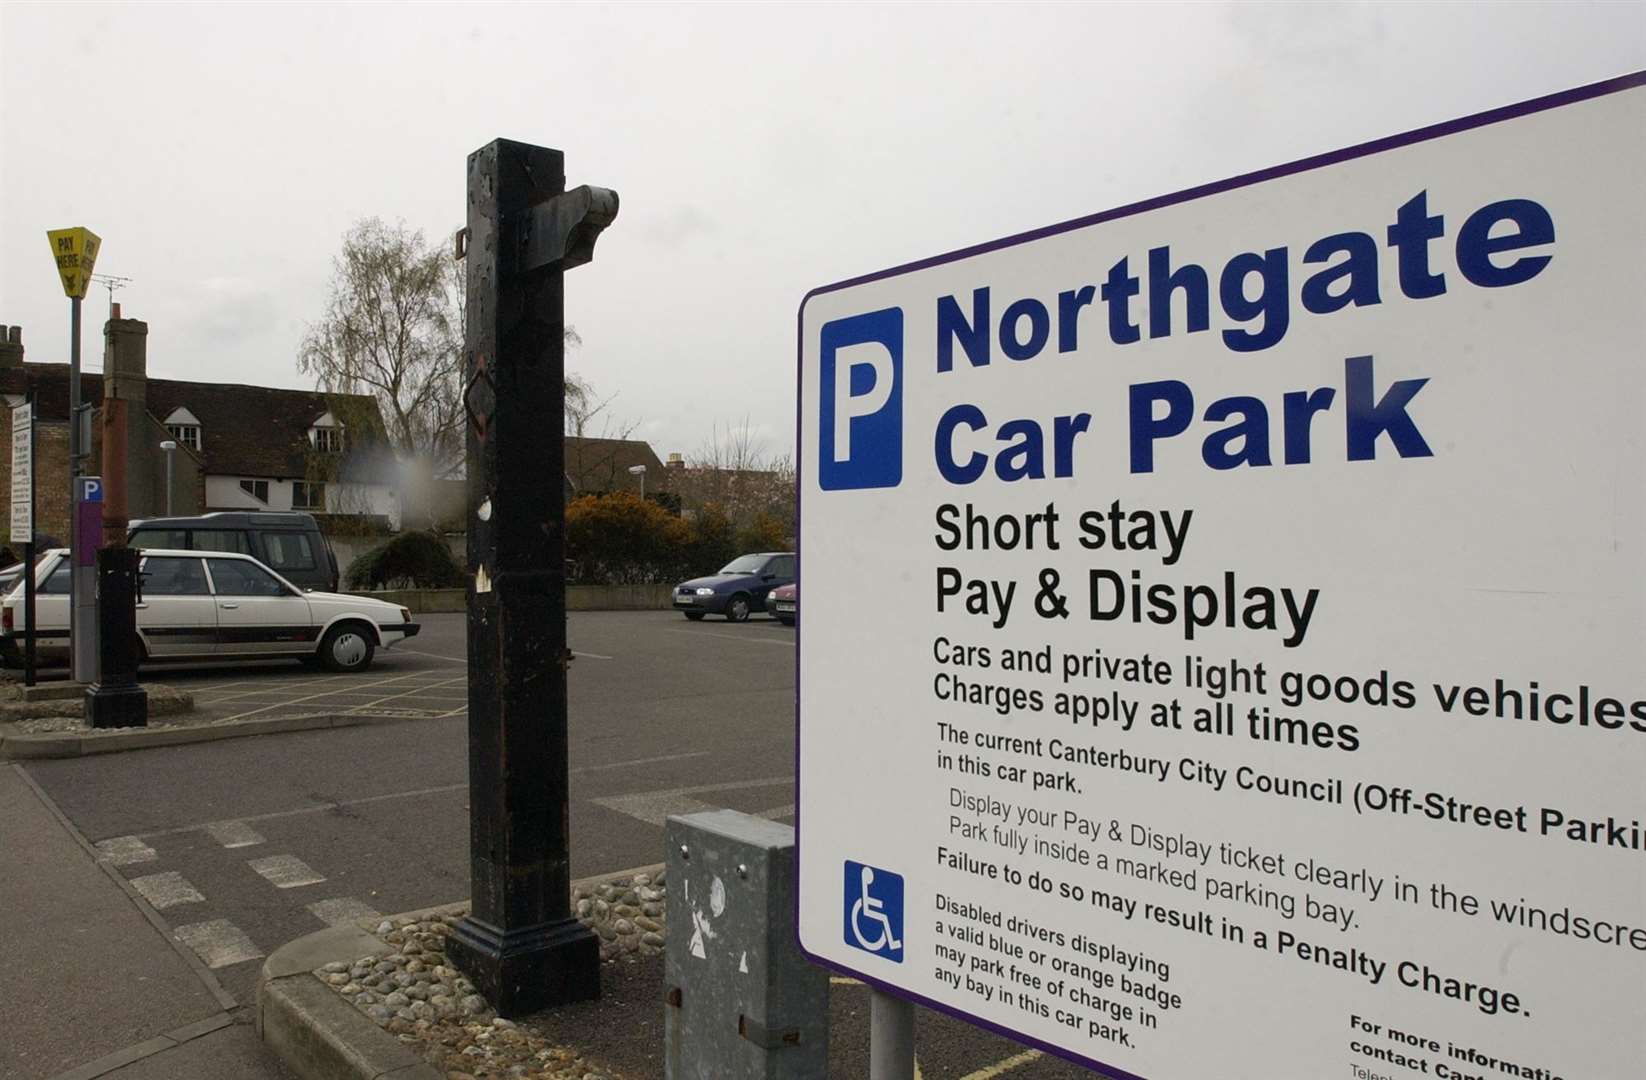 Renham was caught out when she left her Range Rover in a disabled bay in Northgate car park in Canterbury